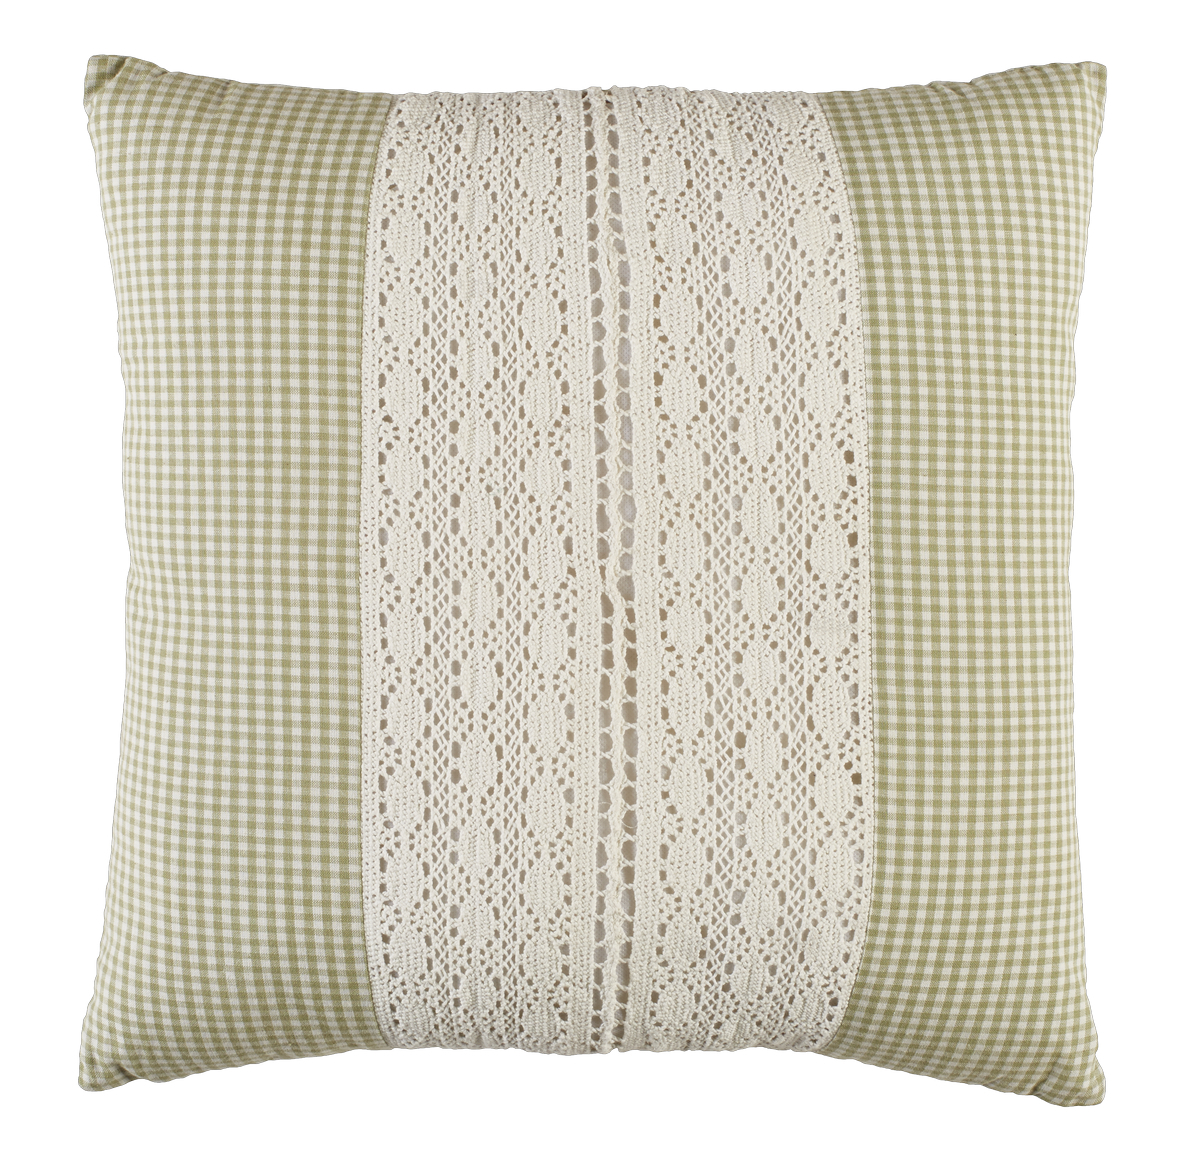 Green Gingham Lace Pillow 18"